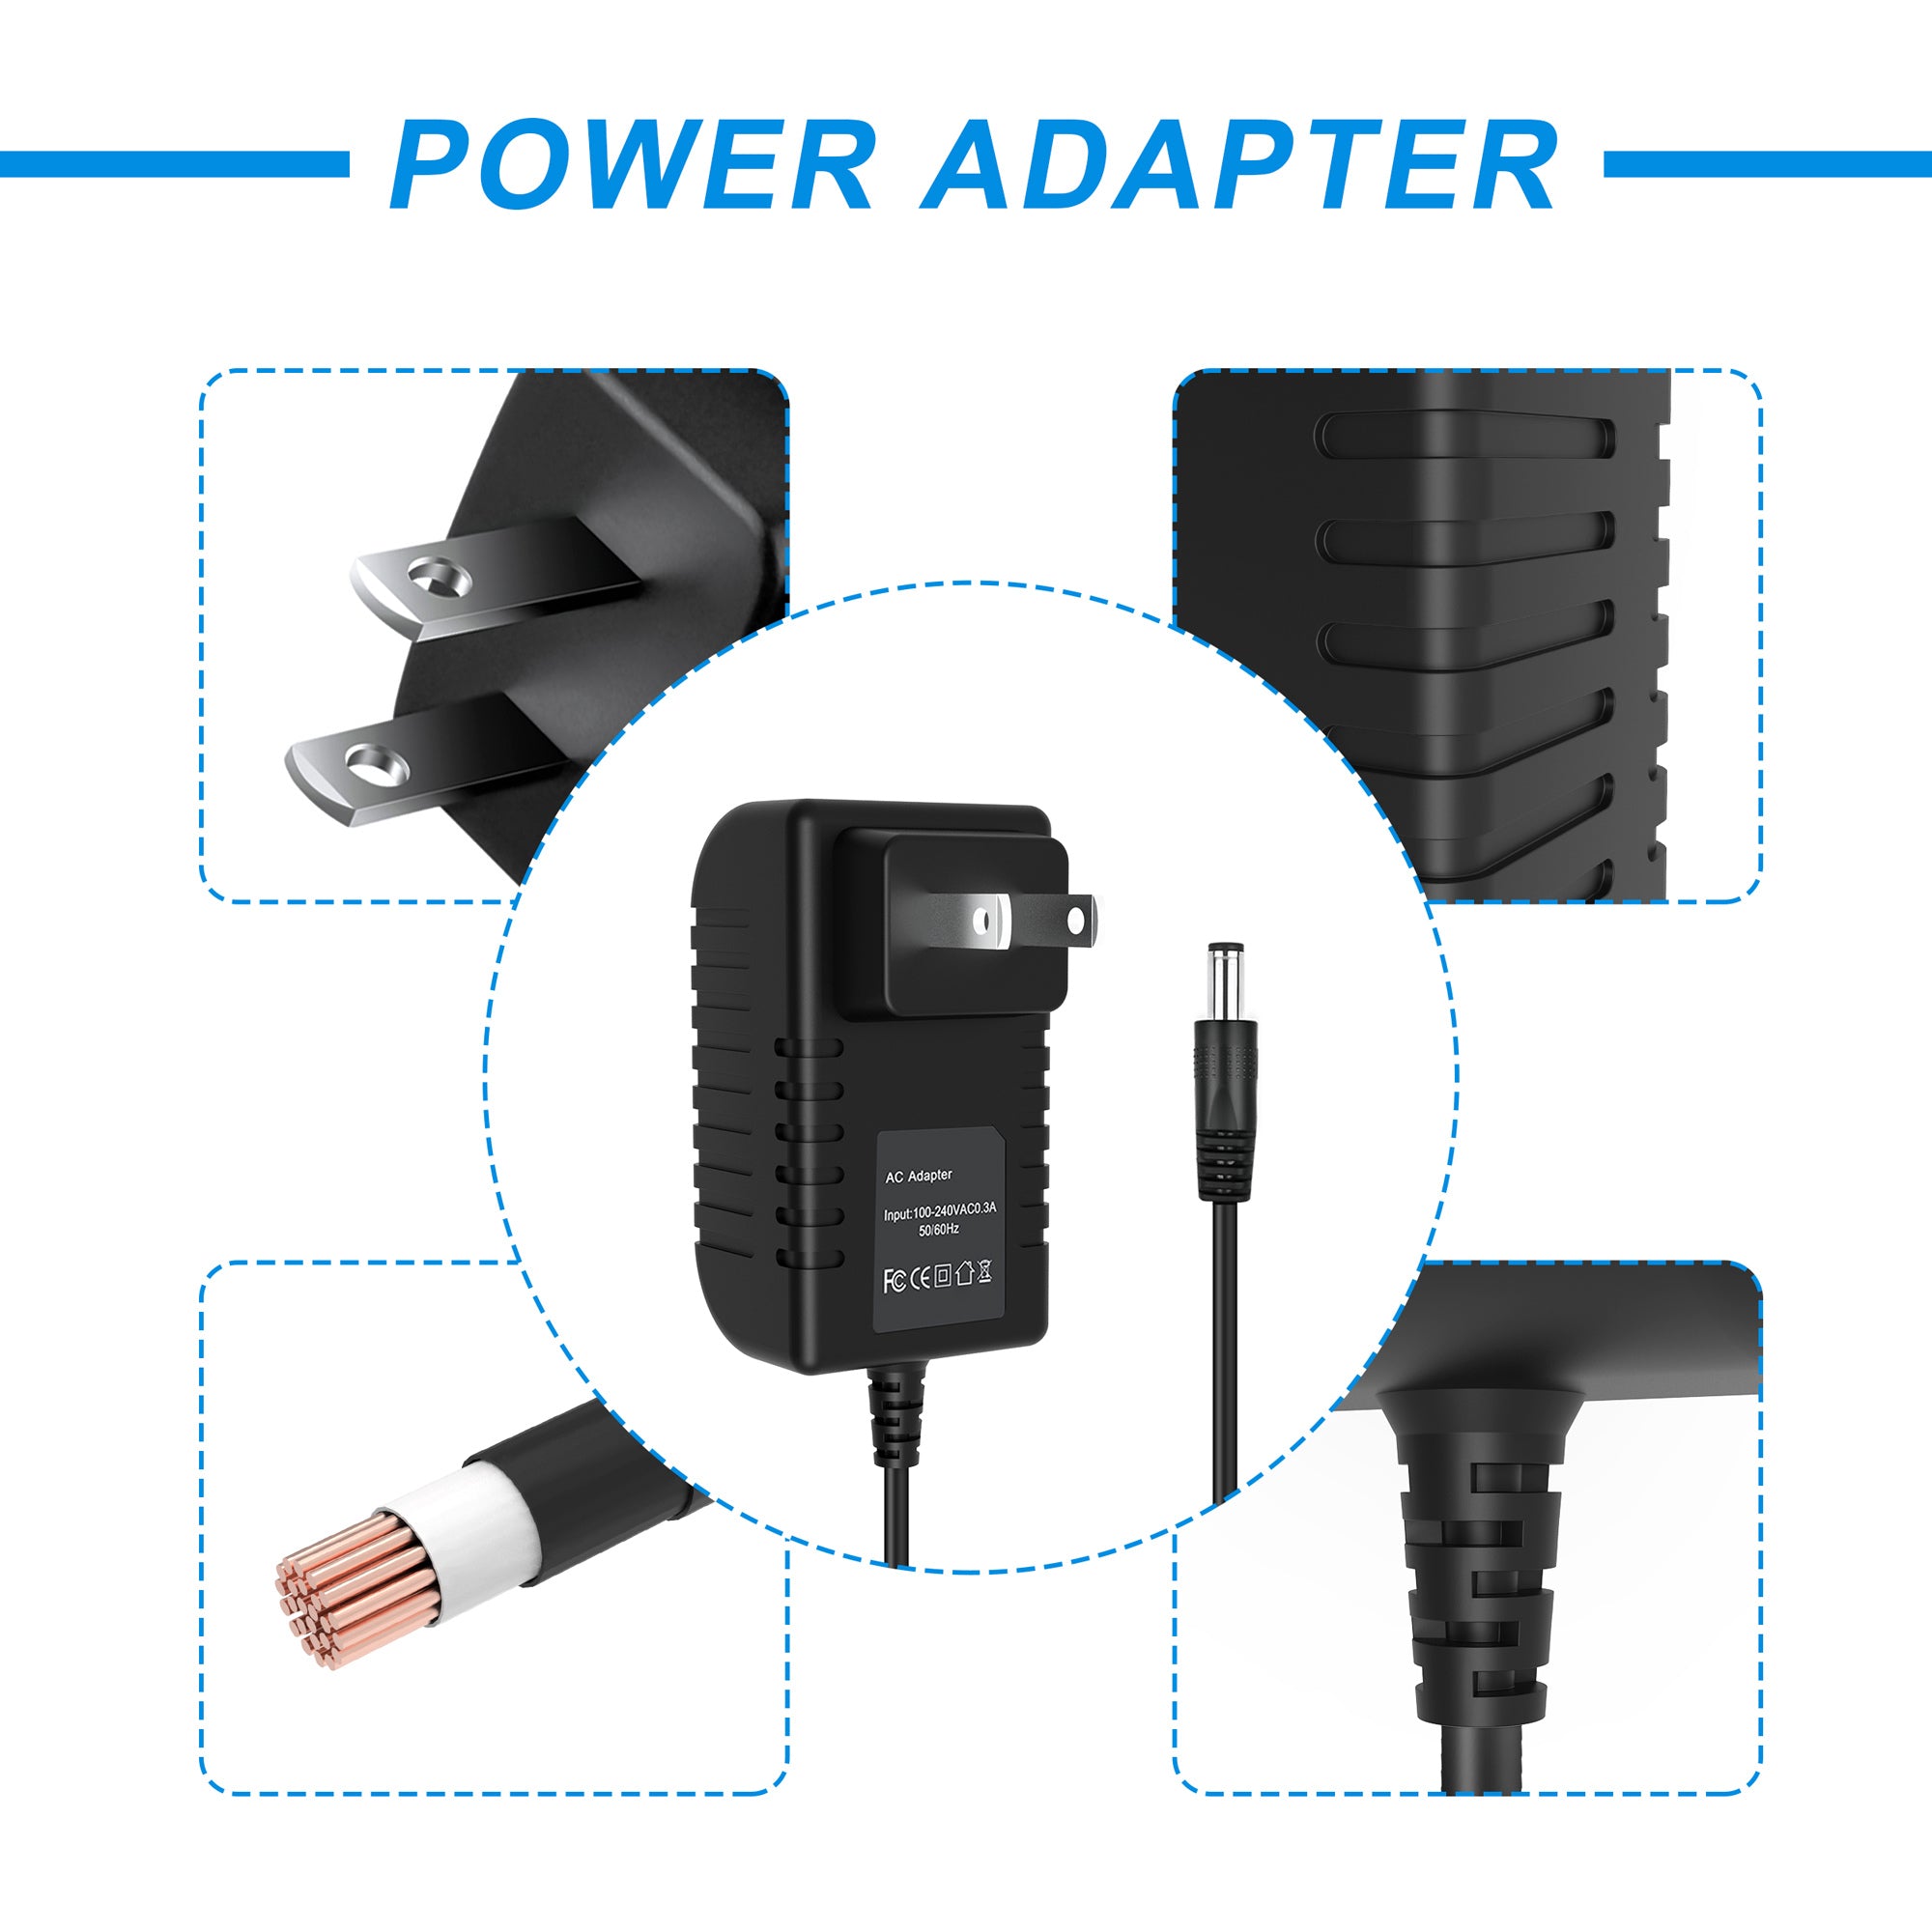 AbleGrid AC/DC Adapter Compatible with Kyocera KR1 Mobile Router Power Supply Cord Cable PS Wall Home Charger Input: 100 - 240 VAC Worldwide Use Mains PSU